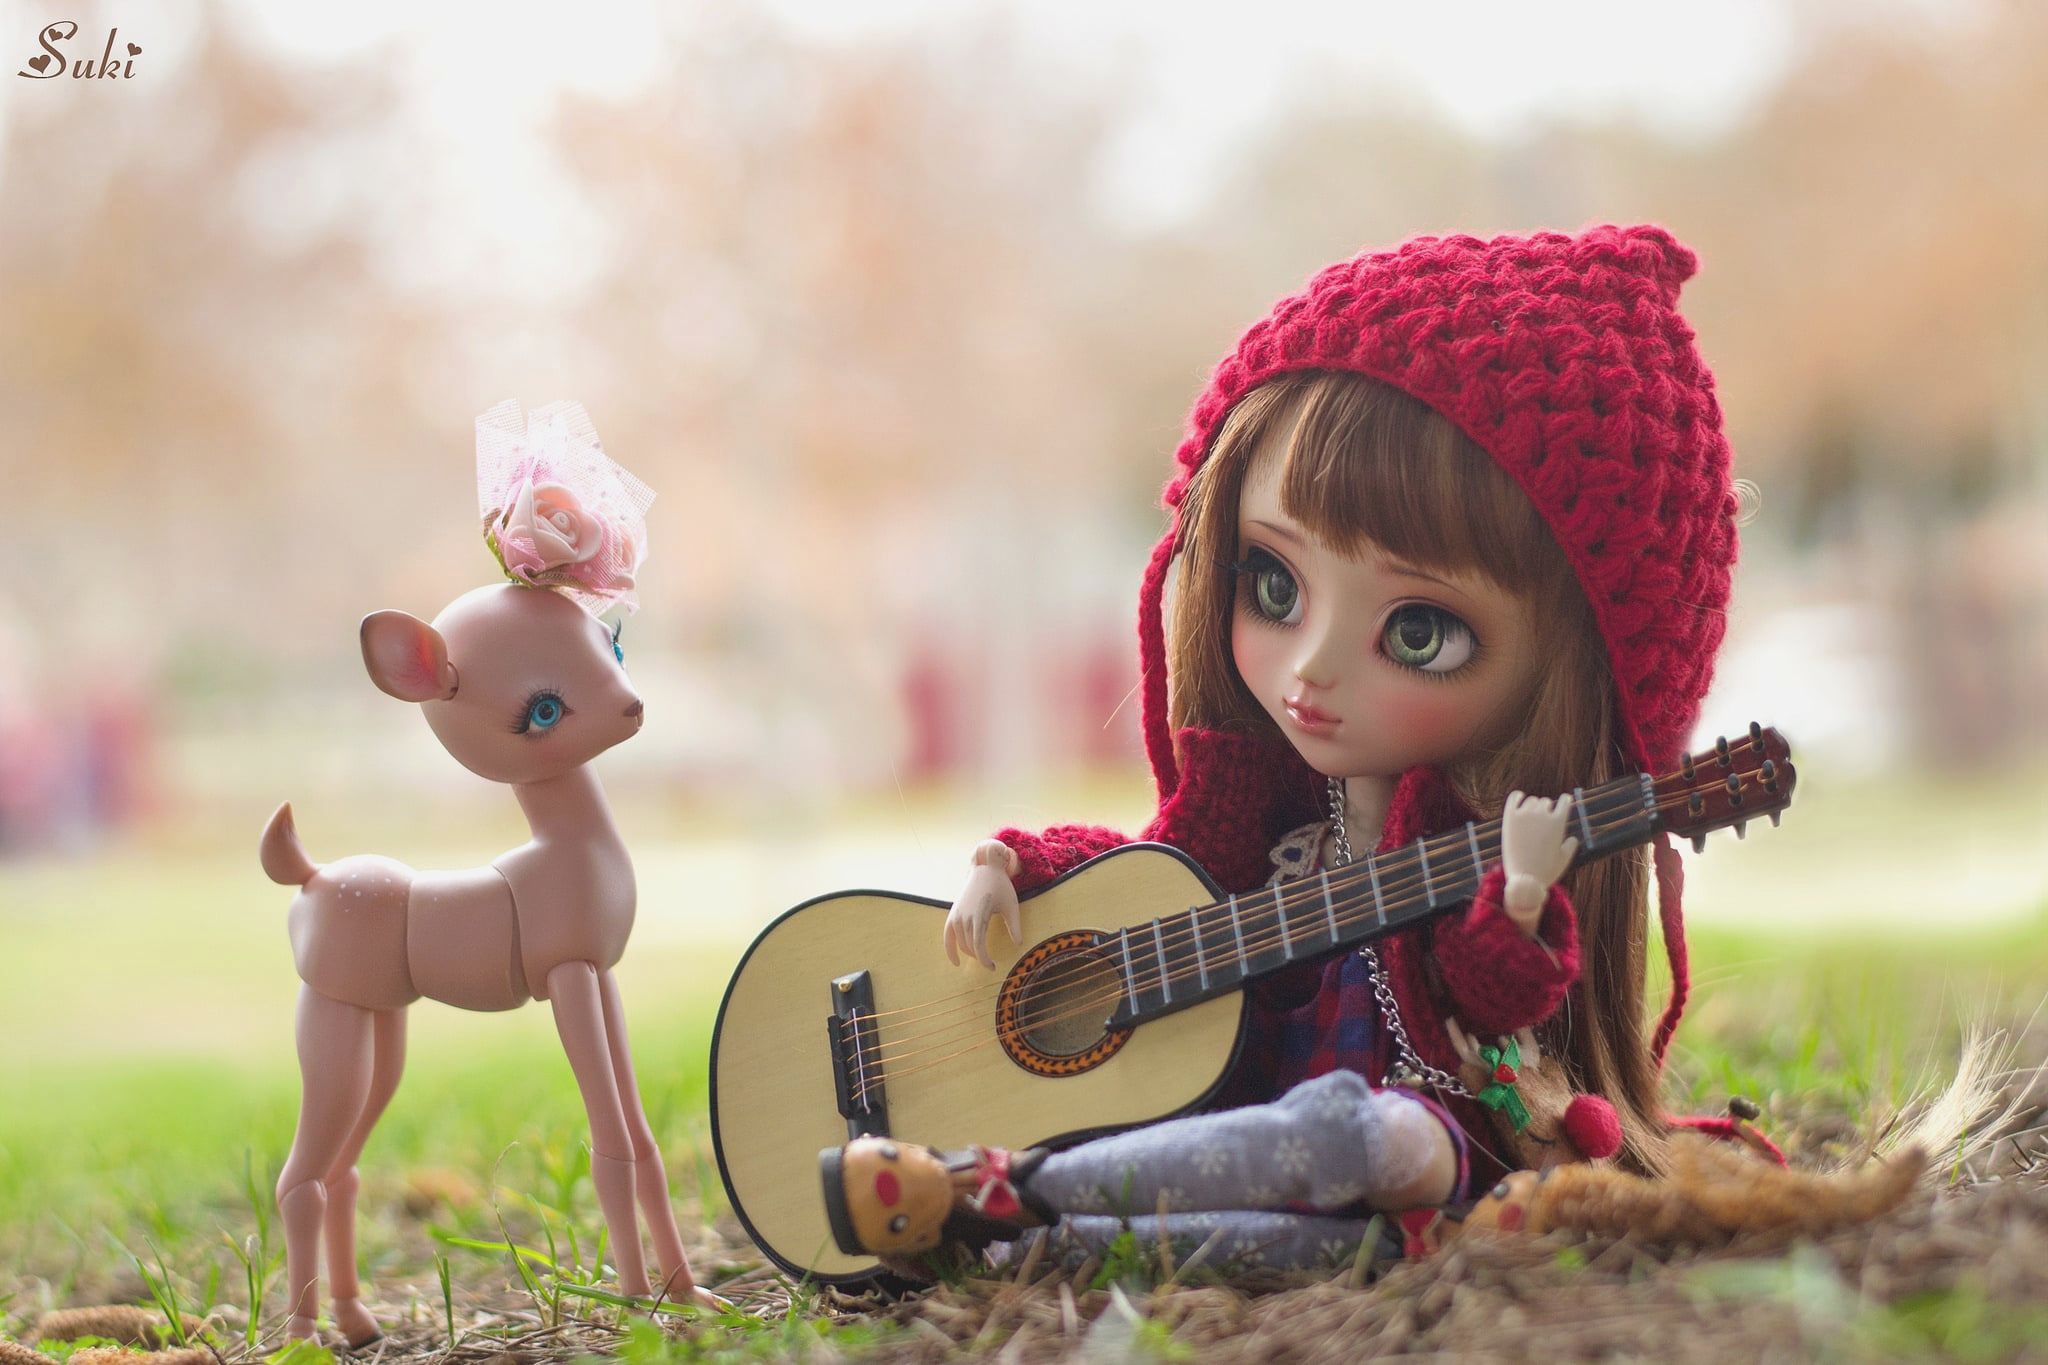 Wallpaper For Girls Wallpapers Girl With Guitar Hd - Best Wallpapers For  Girls - 2048x1365 Wallpaper 